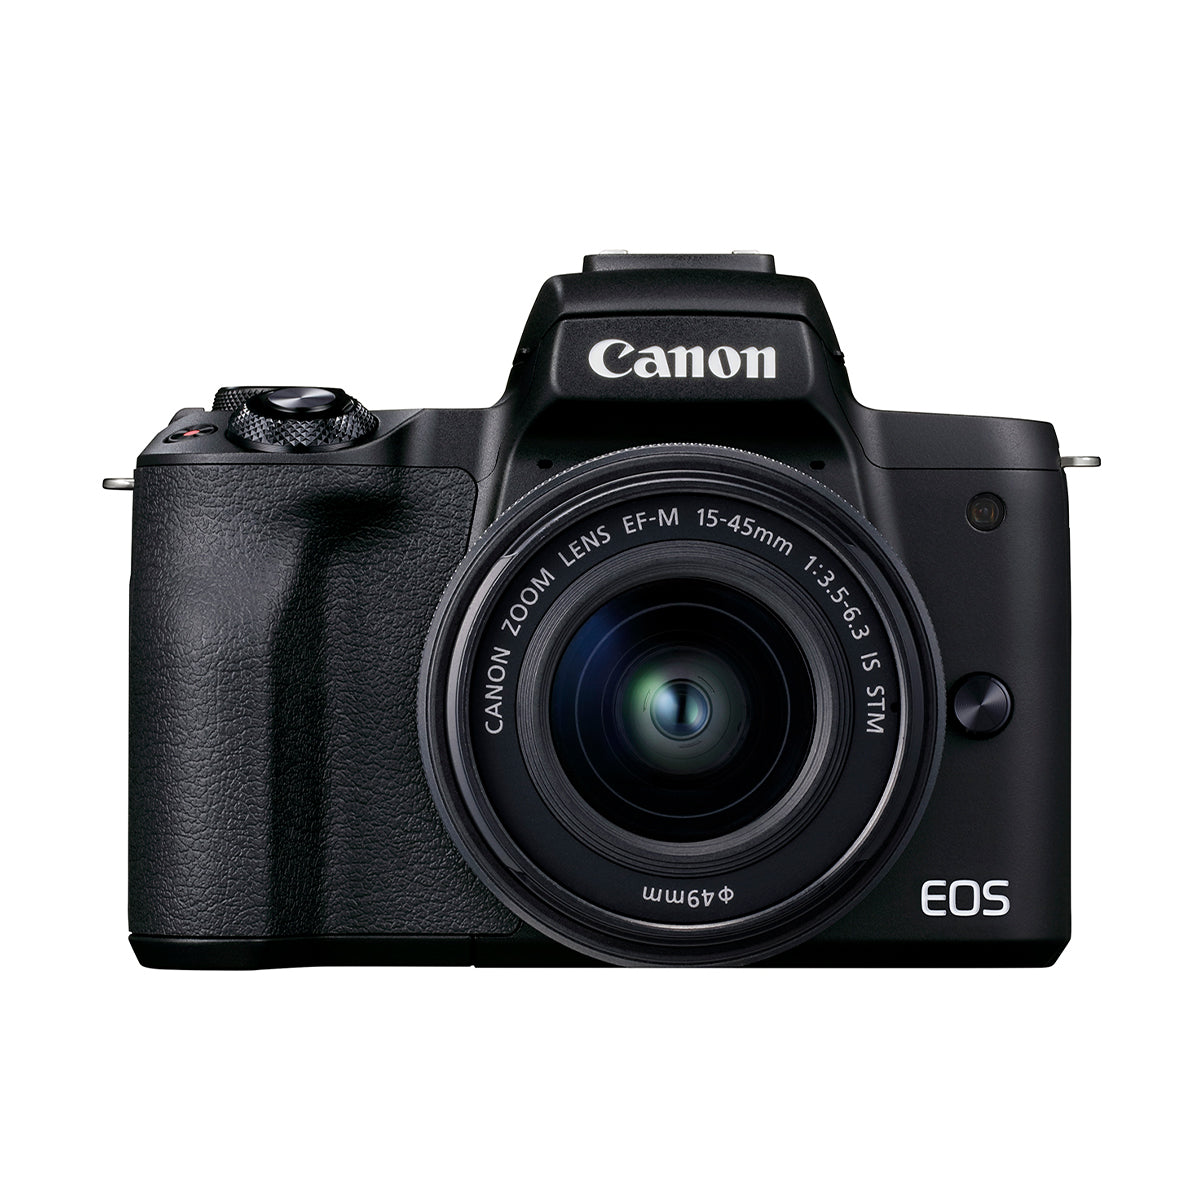 Canon EOS M50 Mark II with EF-M 15-45mm IS STM Lens Kit (Black)